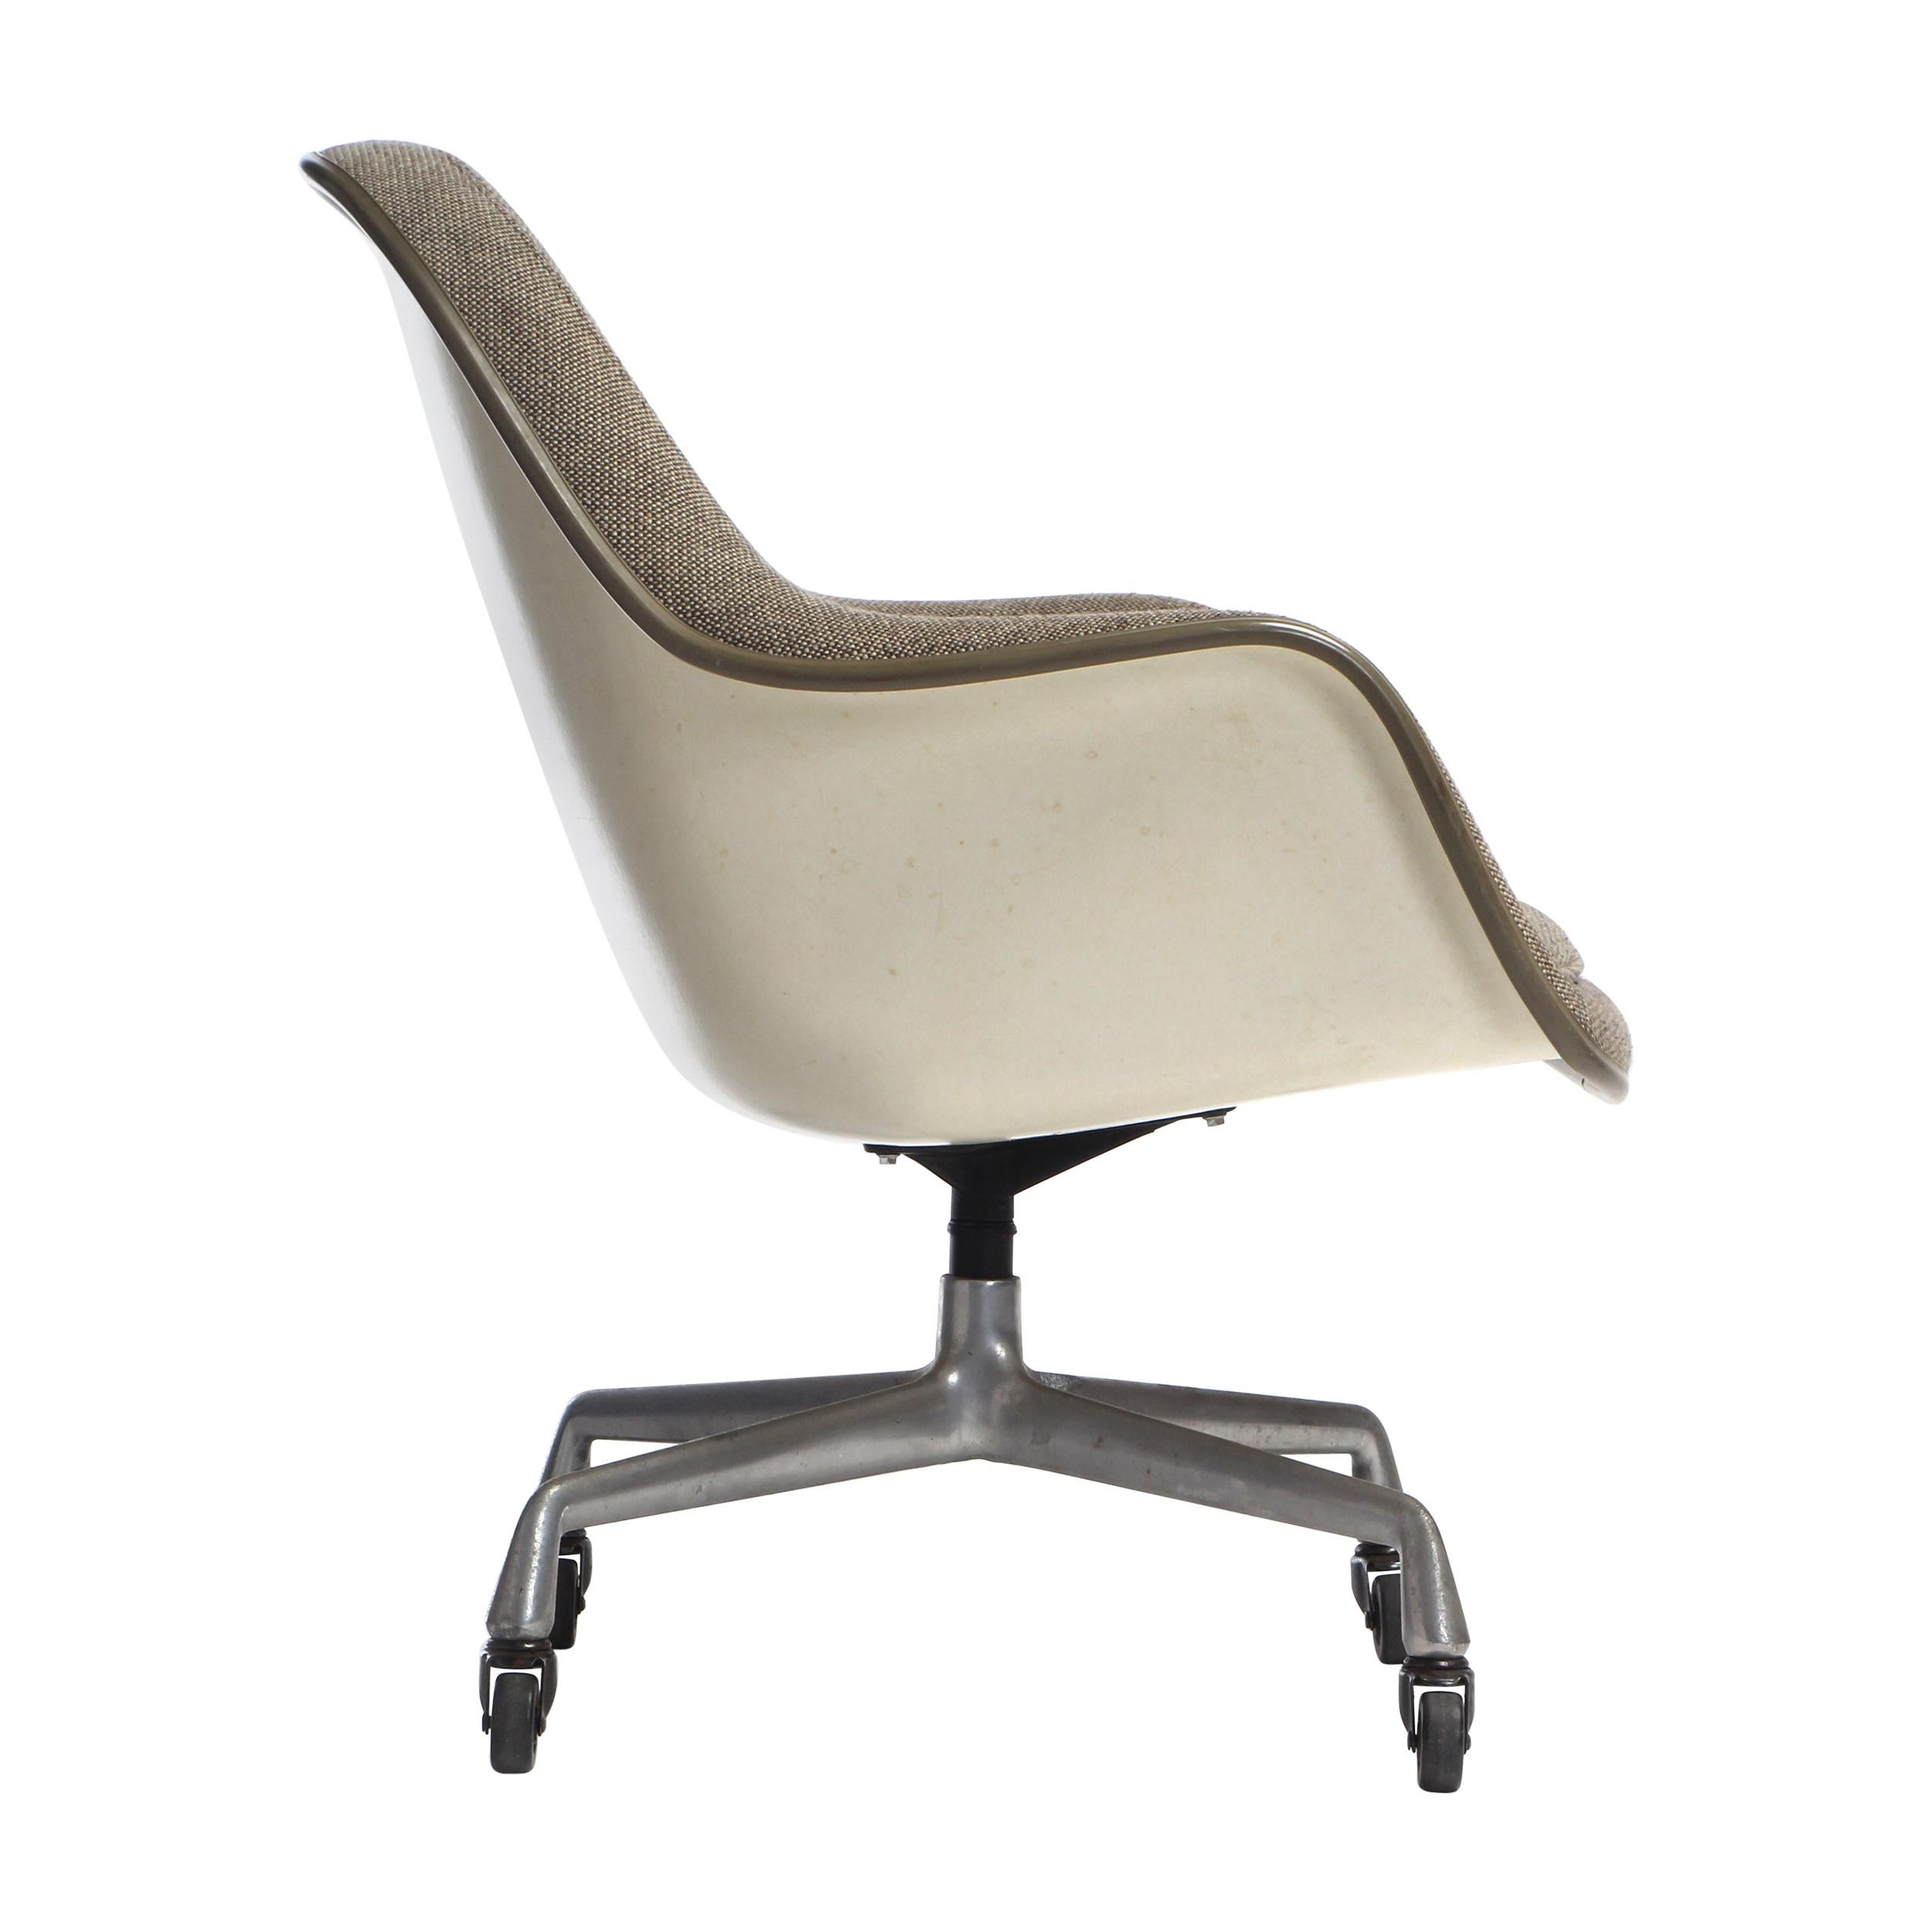 Upholstered High Back Shell Chair by Charles Eames for Herman Miller